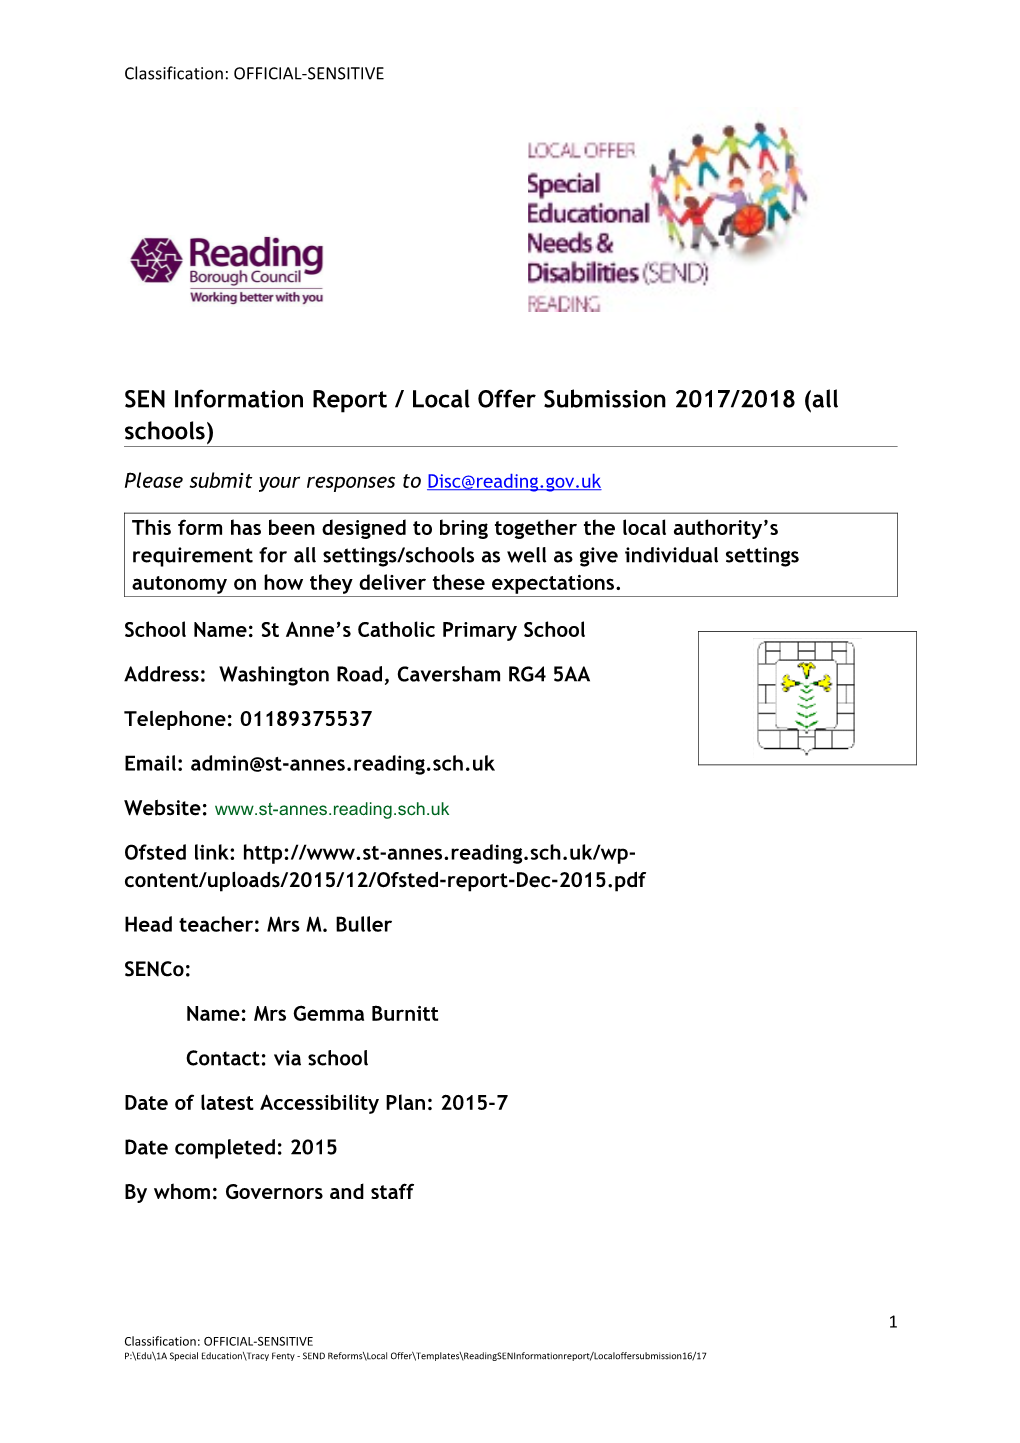 SEN Information Report / Local Offer Submission 2017/2018 (All Schools)